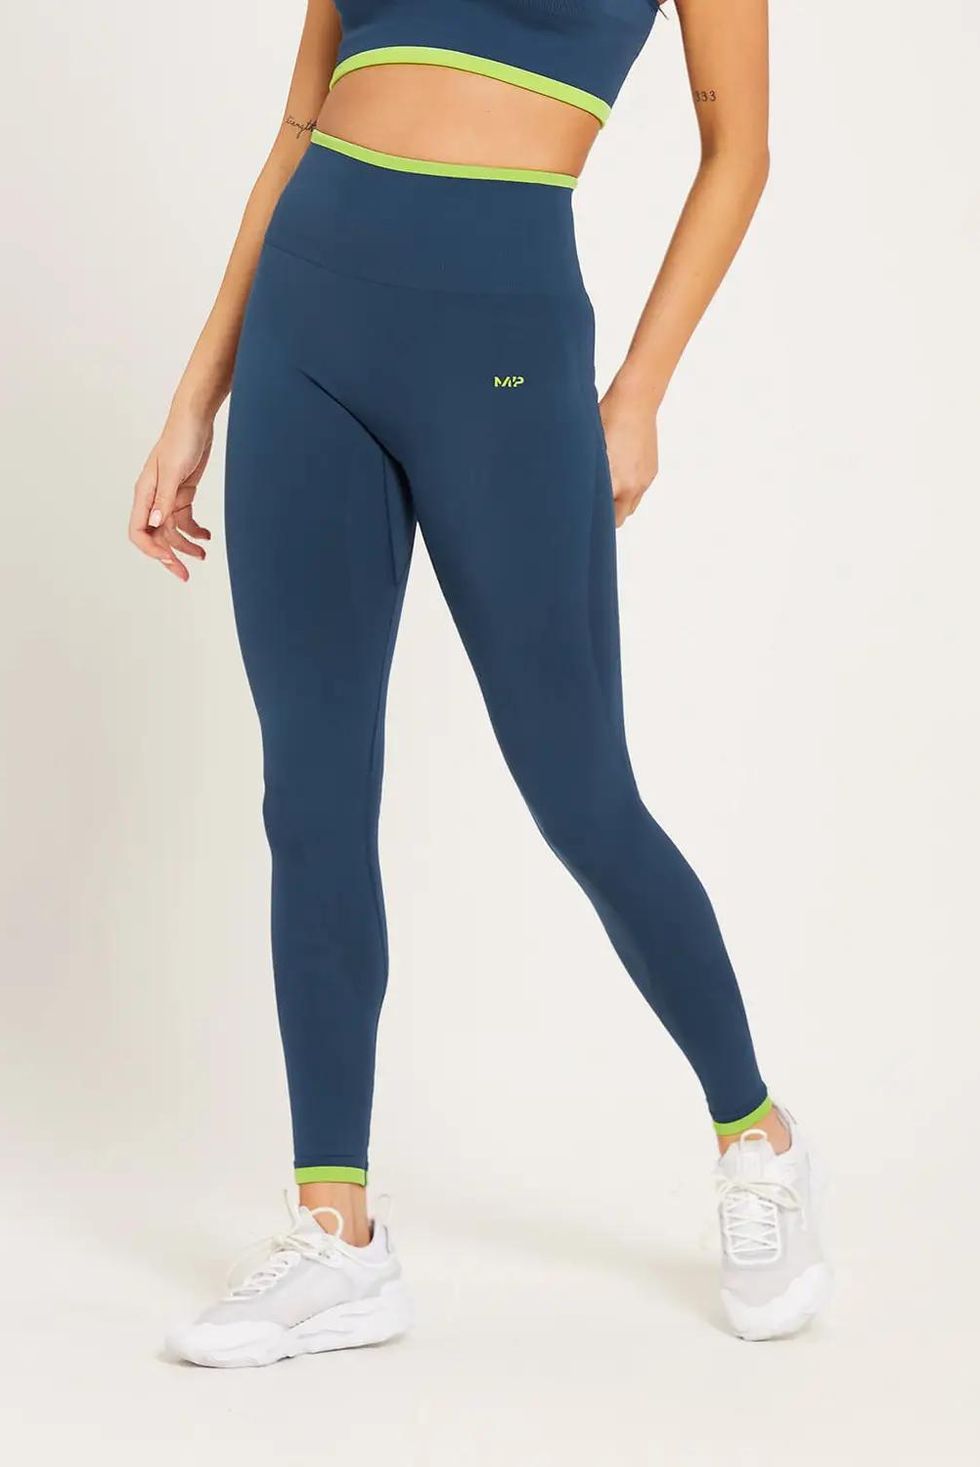 What Is the Difference Between Seamless Leggings and Leggings? – GymWear UK